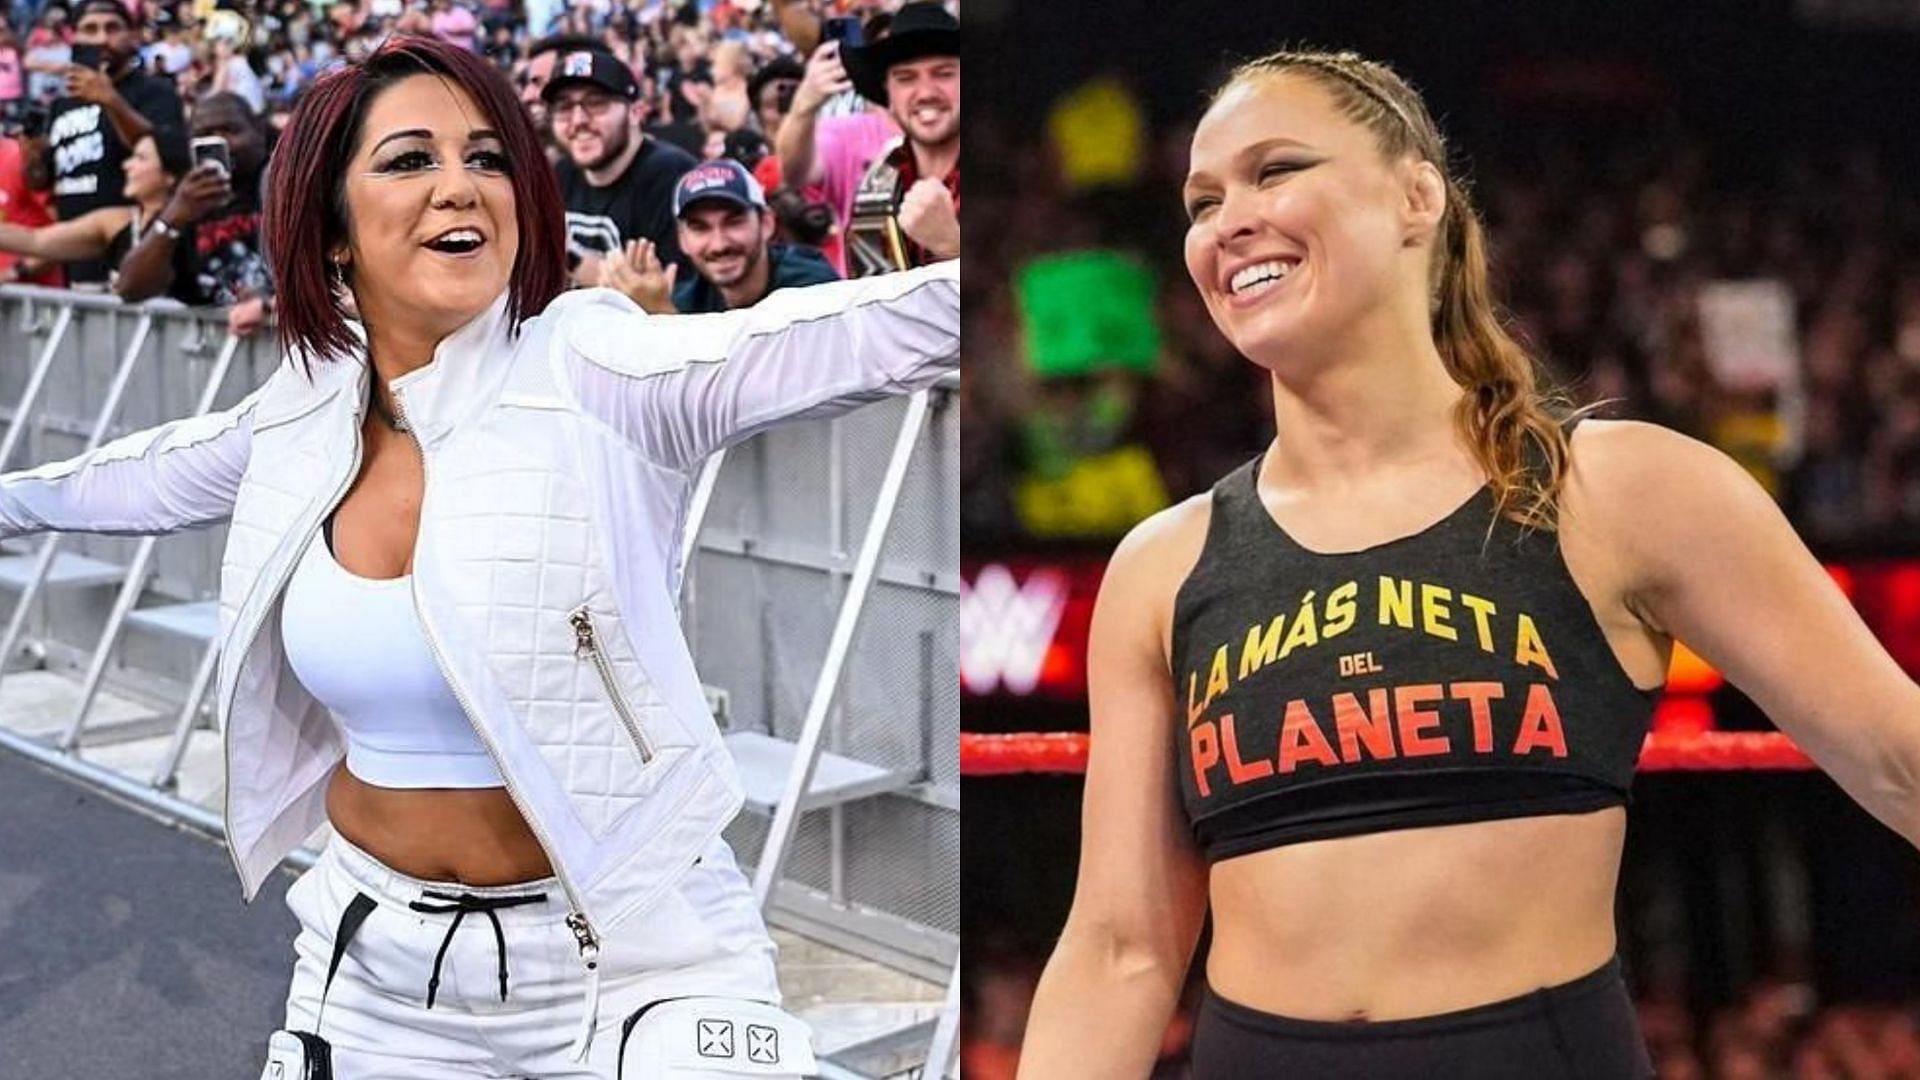 Who was the best womens wrestler of 2022 on the main roster? : r/WWE